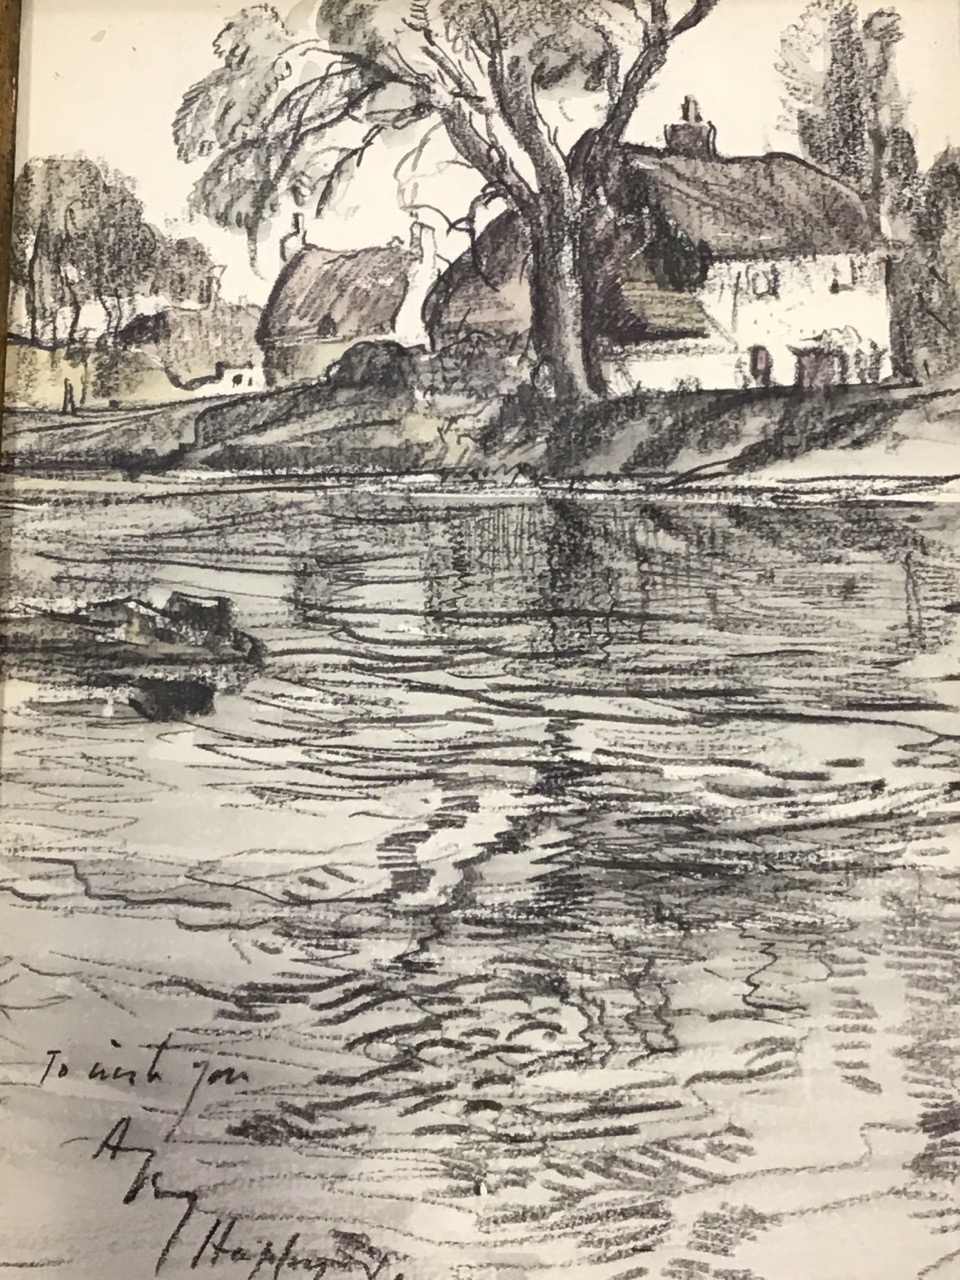 Samuel Lamorna Birch, pencil, river landscape with cottages & trees, a Christmas card sketch - Image 3 of 3